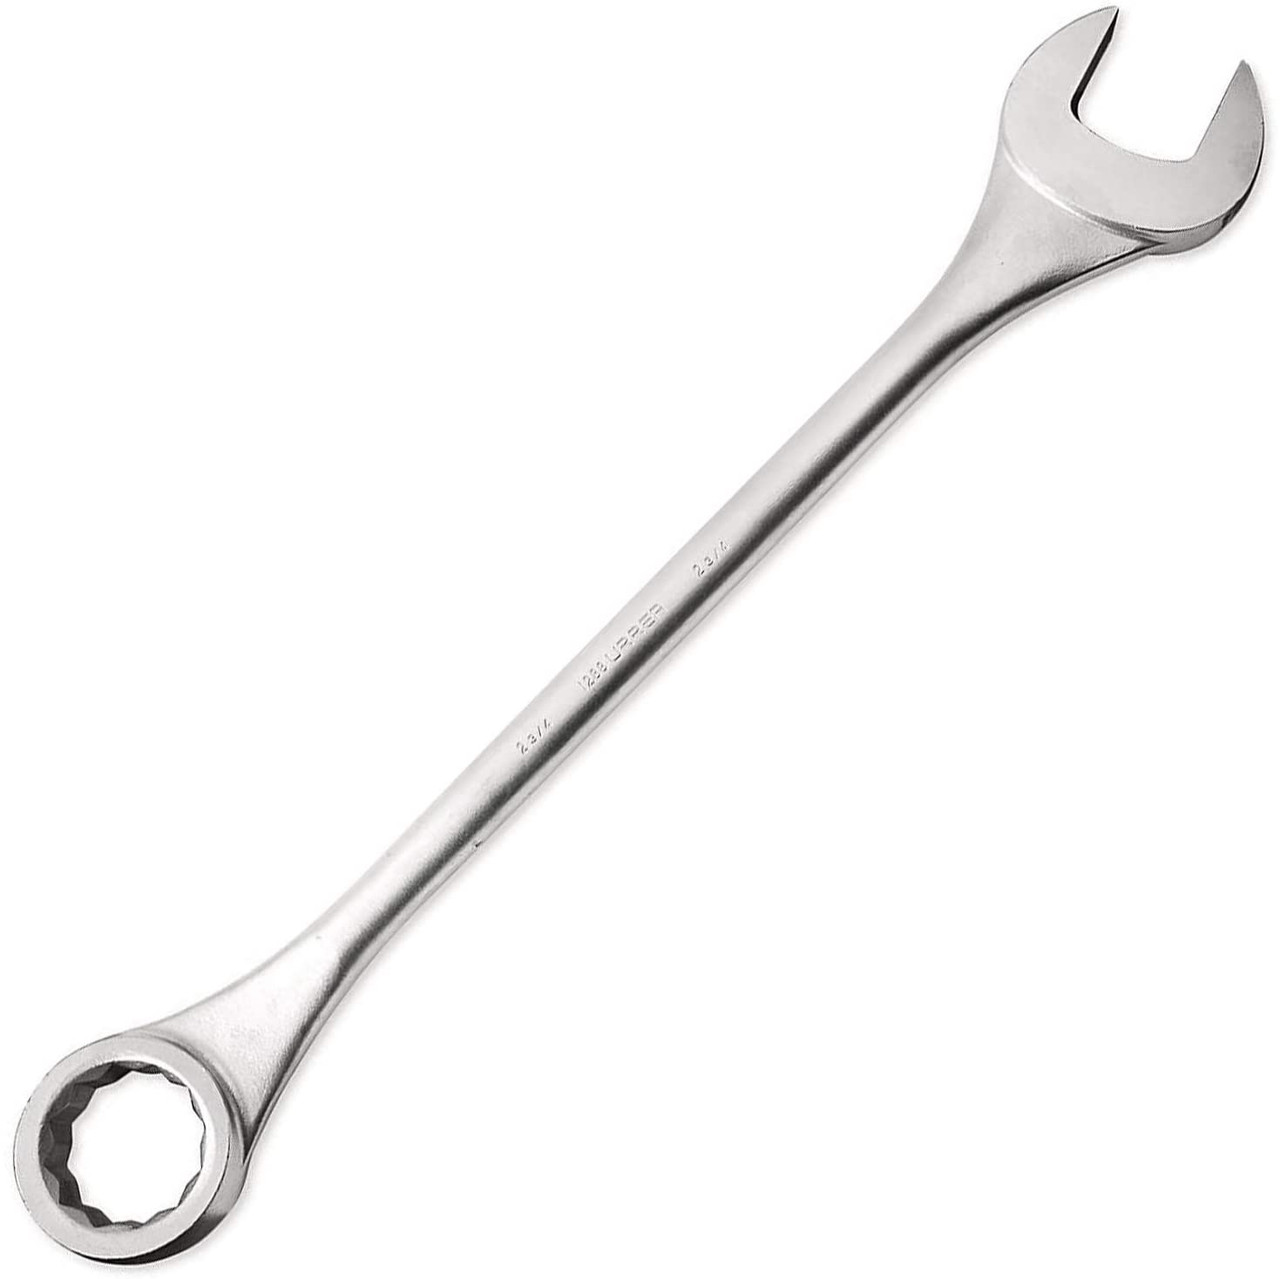 Satin finish combination wrench, Size: 2-15/16, 12 point, Tool Length: 33-1/2"